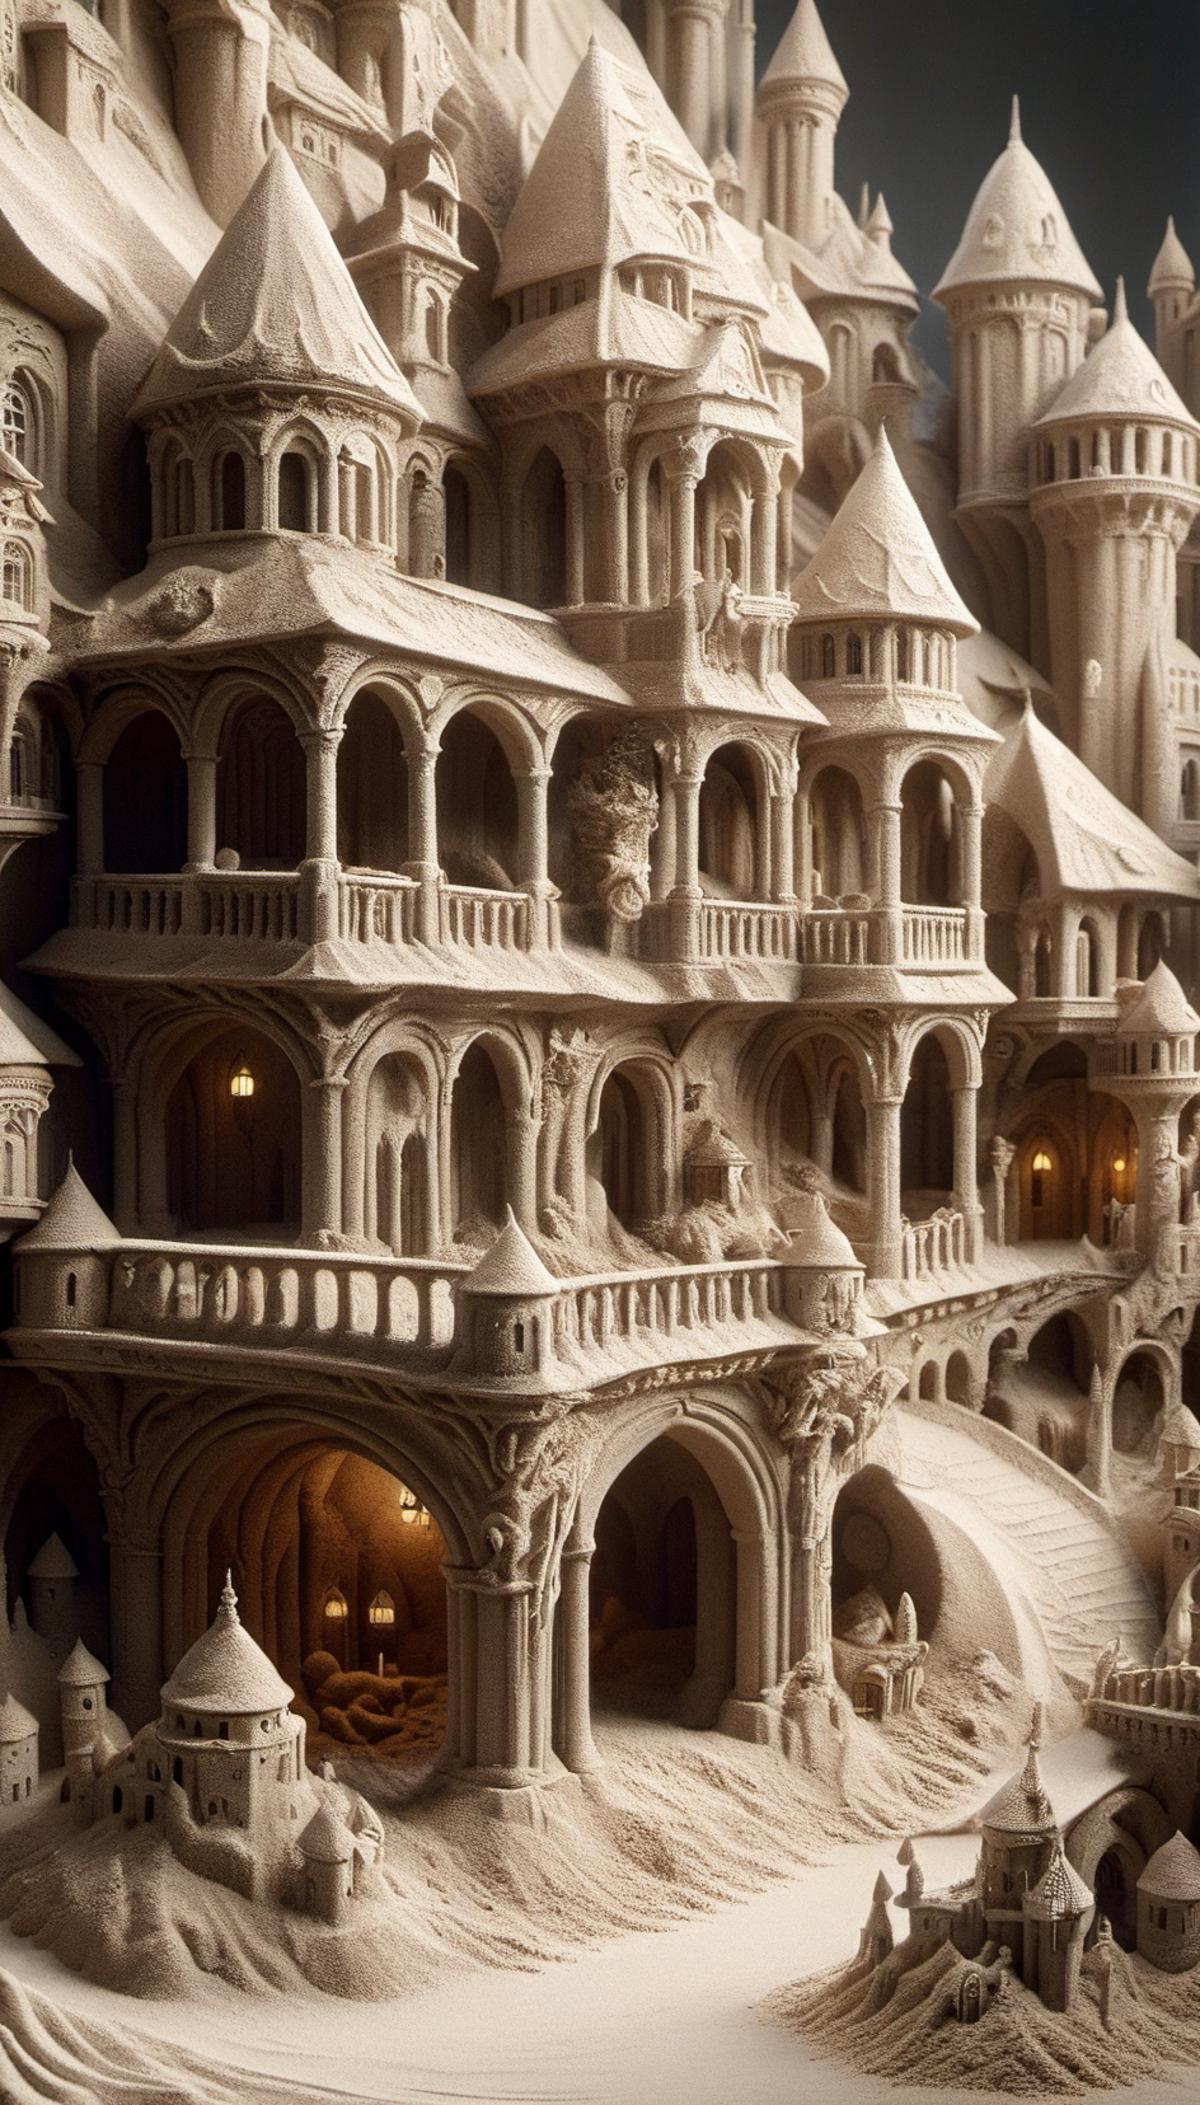 Envy Fantasy Architectural Flourishes XL 01 image by CHINGEL